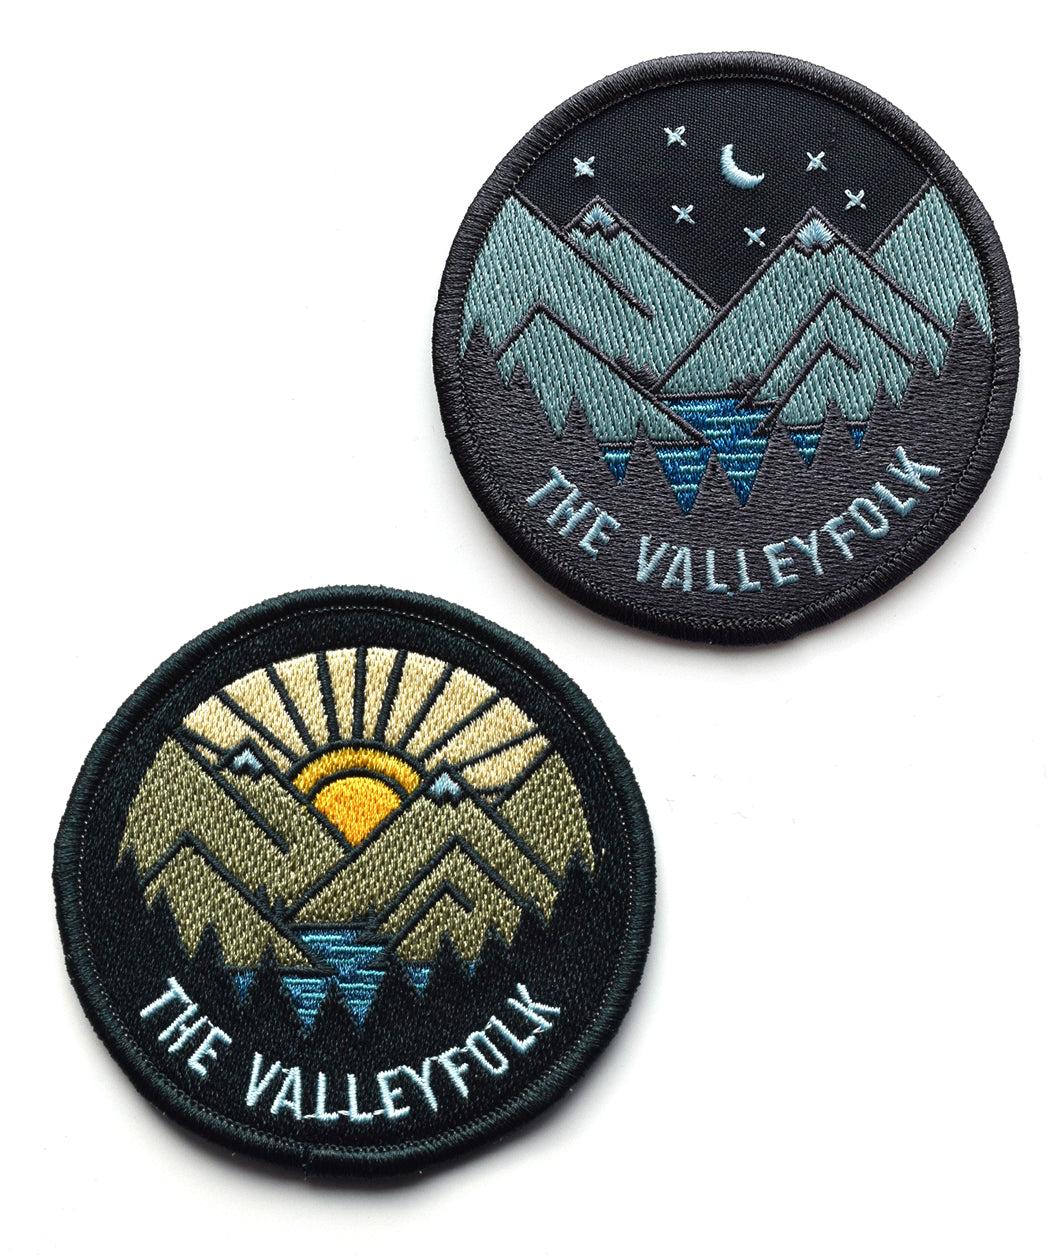 Two patches, one with a sun rising behind vector drawin mountains with a lake and silhouetted trees and “The Valleyfolk” in sans serif font at the bottom. The other patch is the same mountain scene at night - from the Valleyfolk